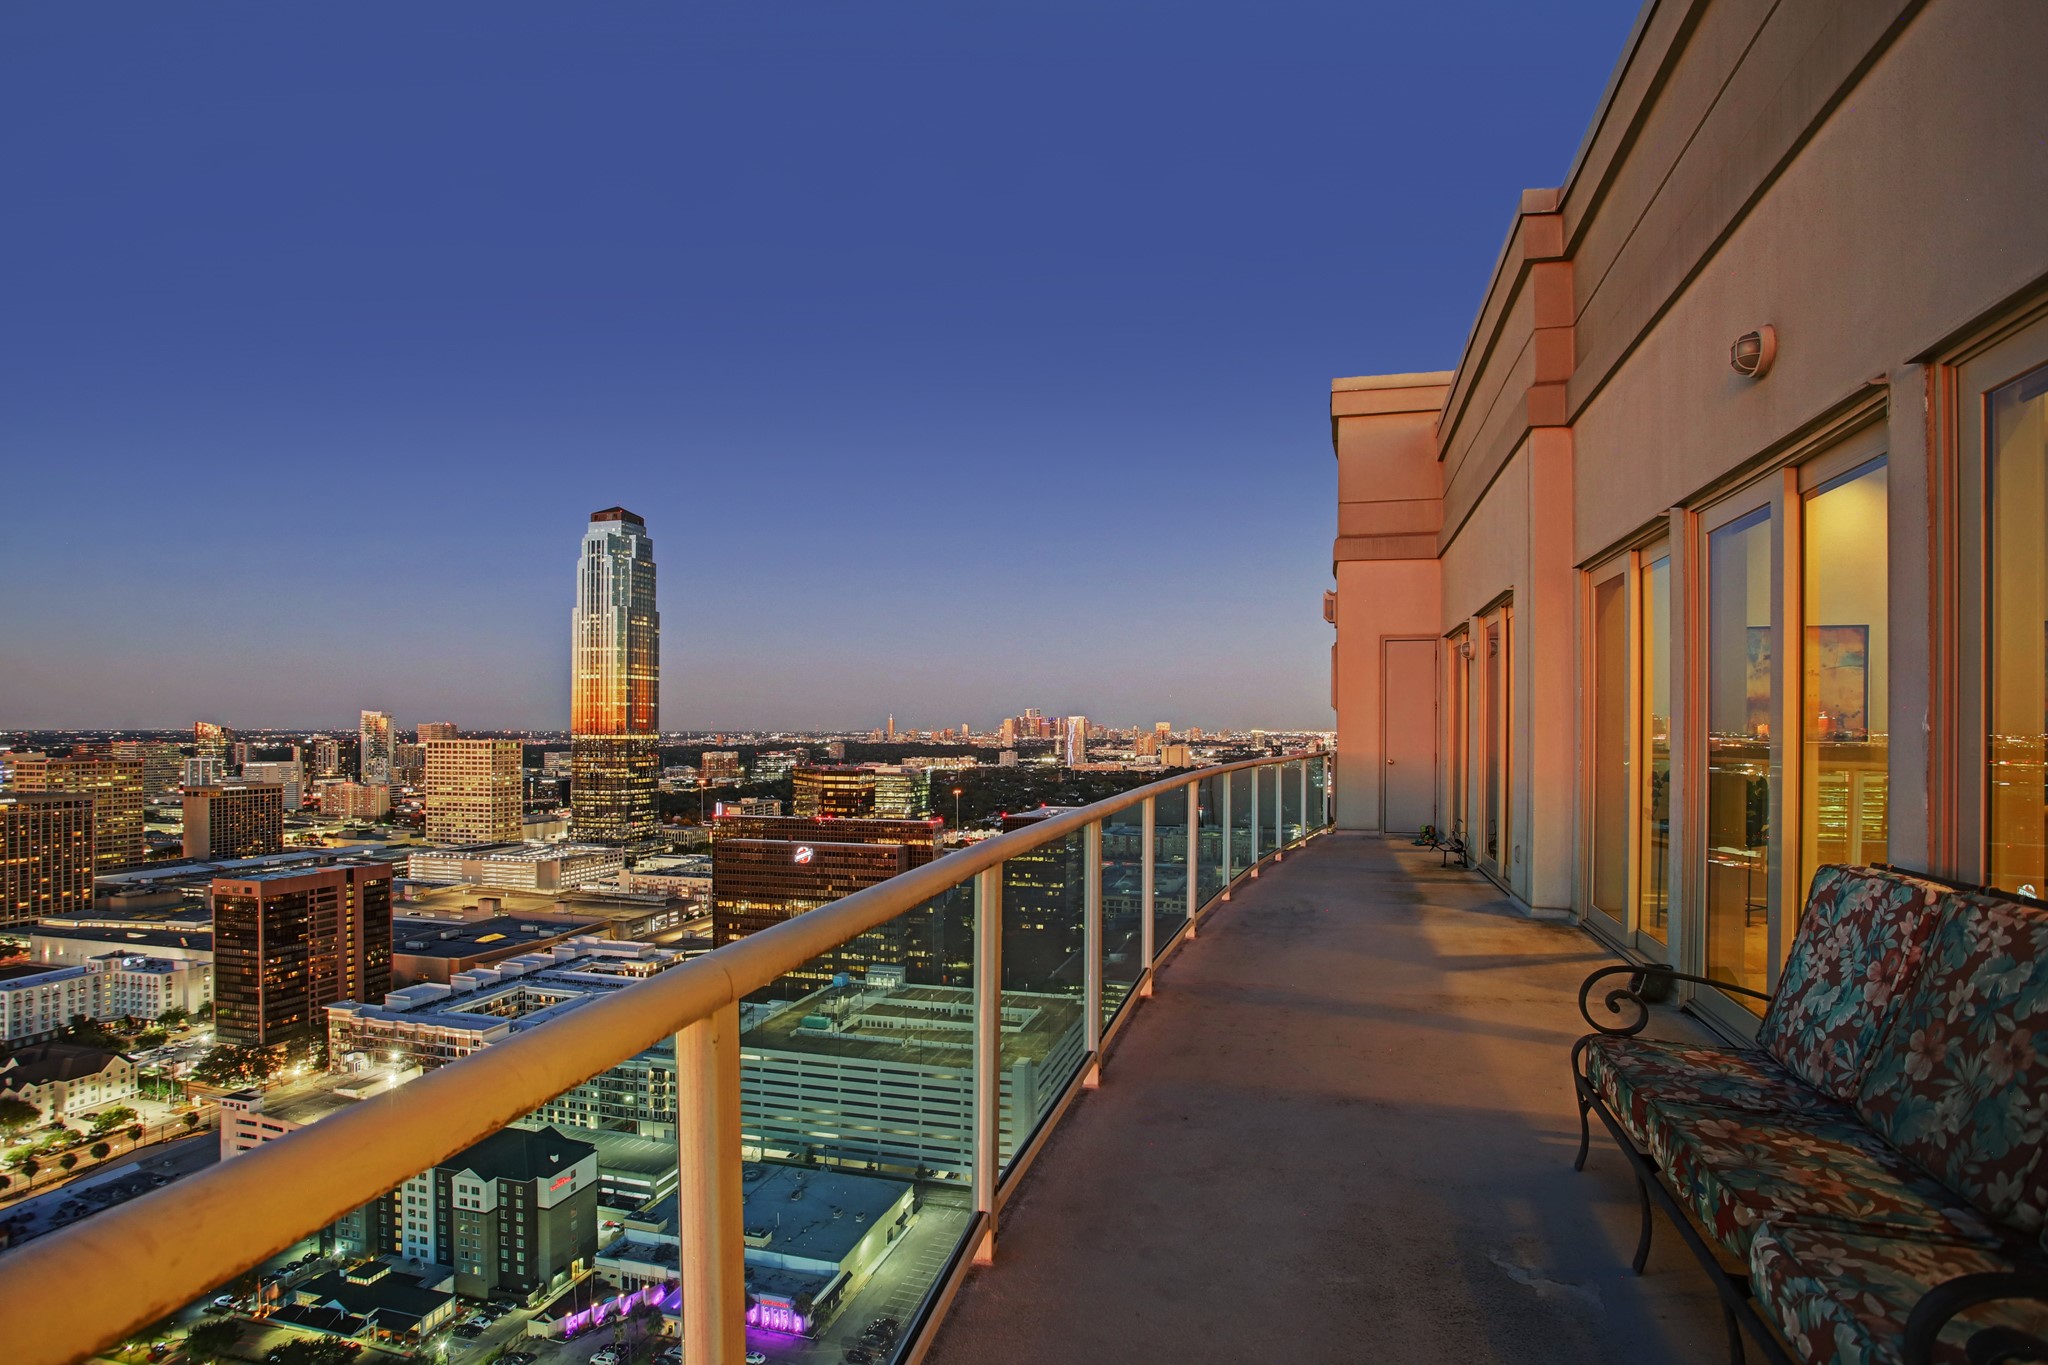 Enjoy spectacular views/sunsets from the 31st floor.